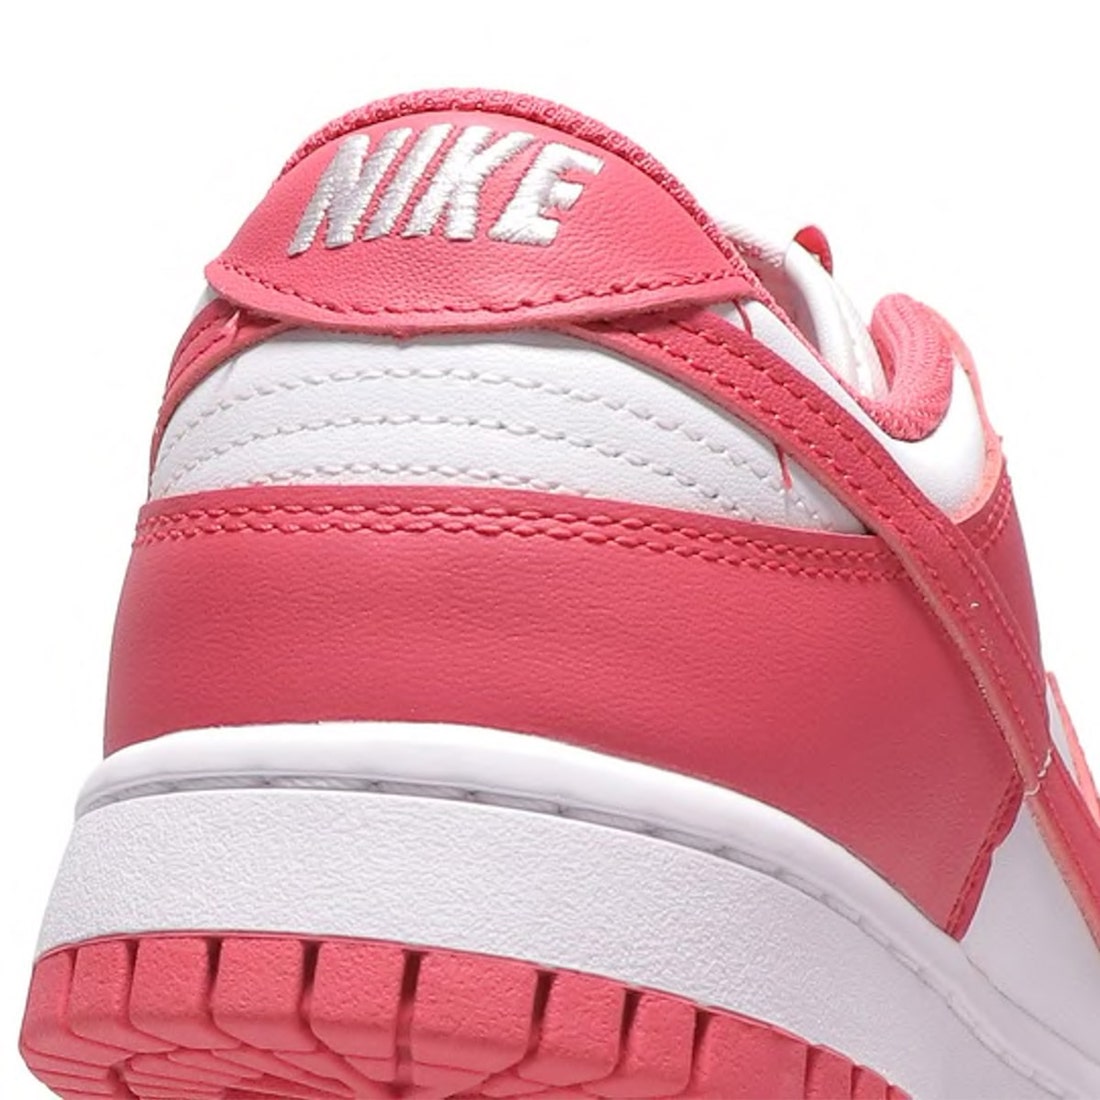 2021 Nike Dunk Low Archeo Pink DD1503 111 Release Date 9